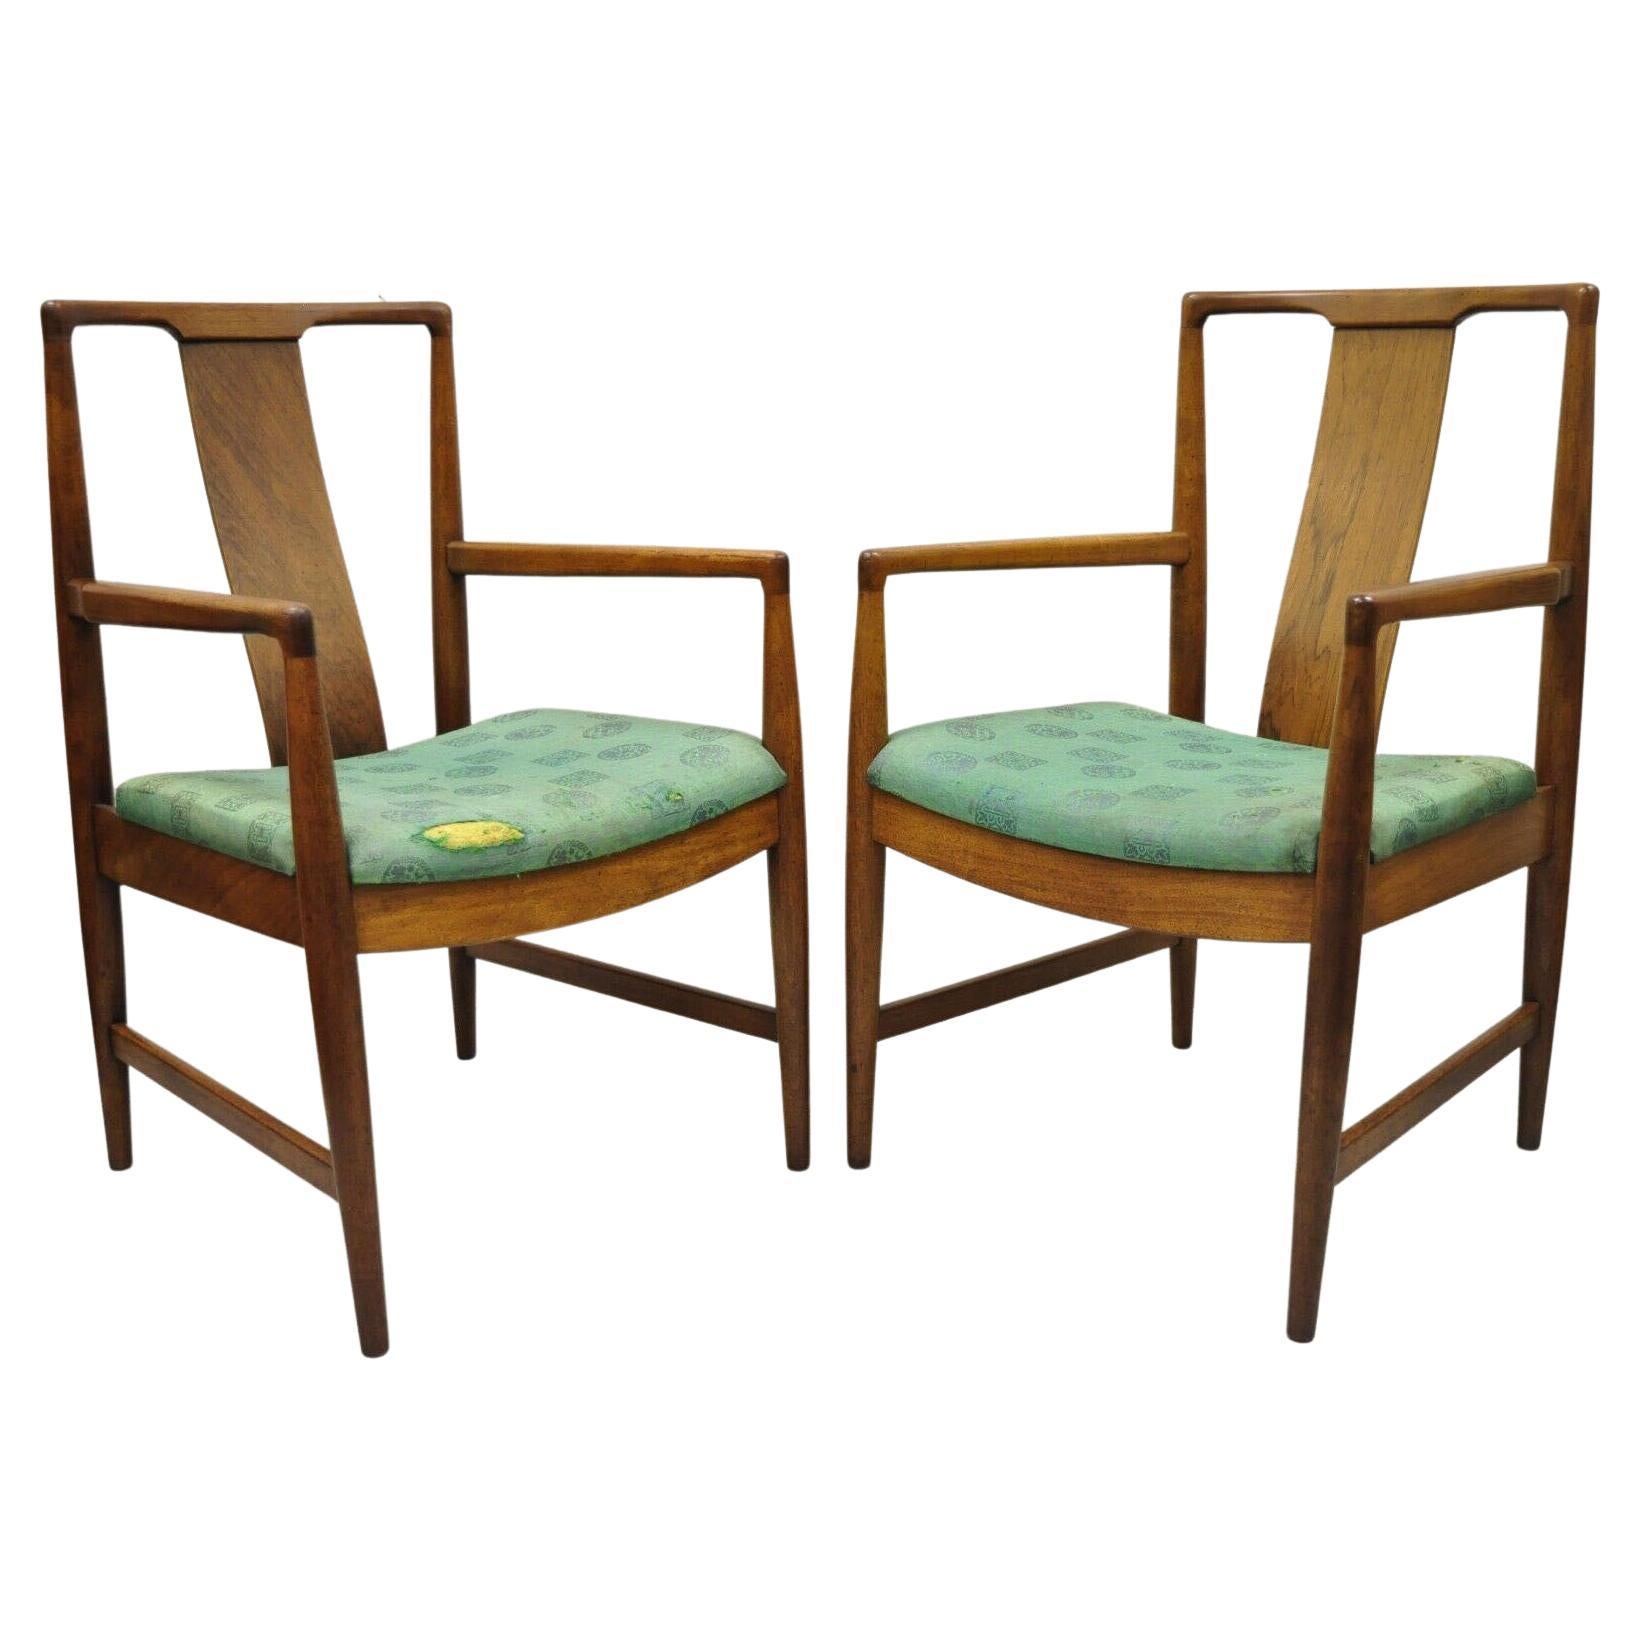 Mid-Century Modern Walnut Curved Angled Back Dining Arm Chairs - a Pair